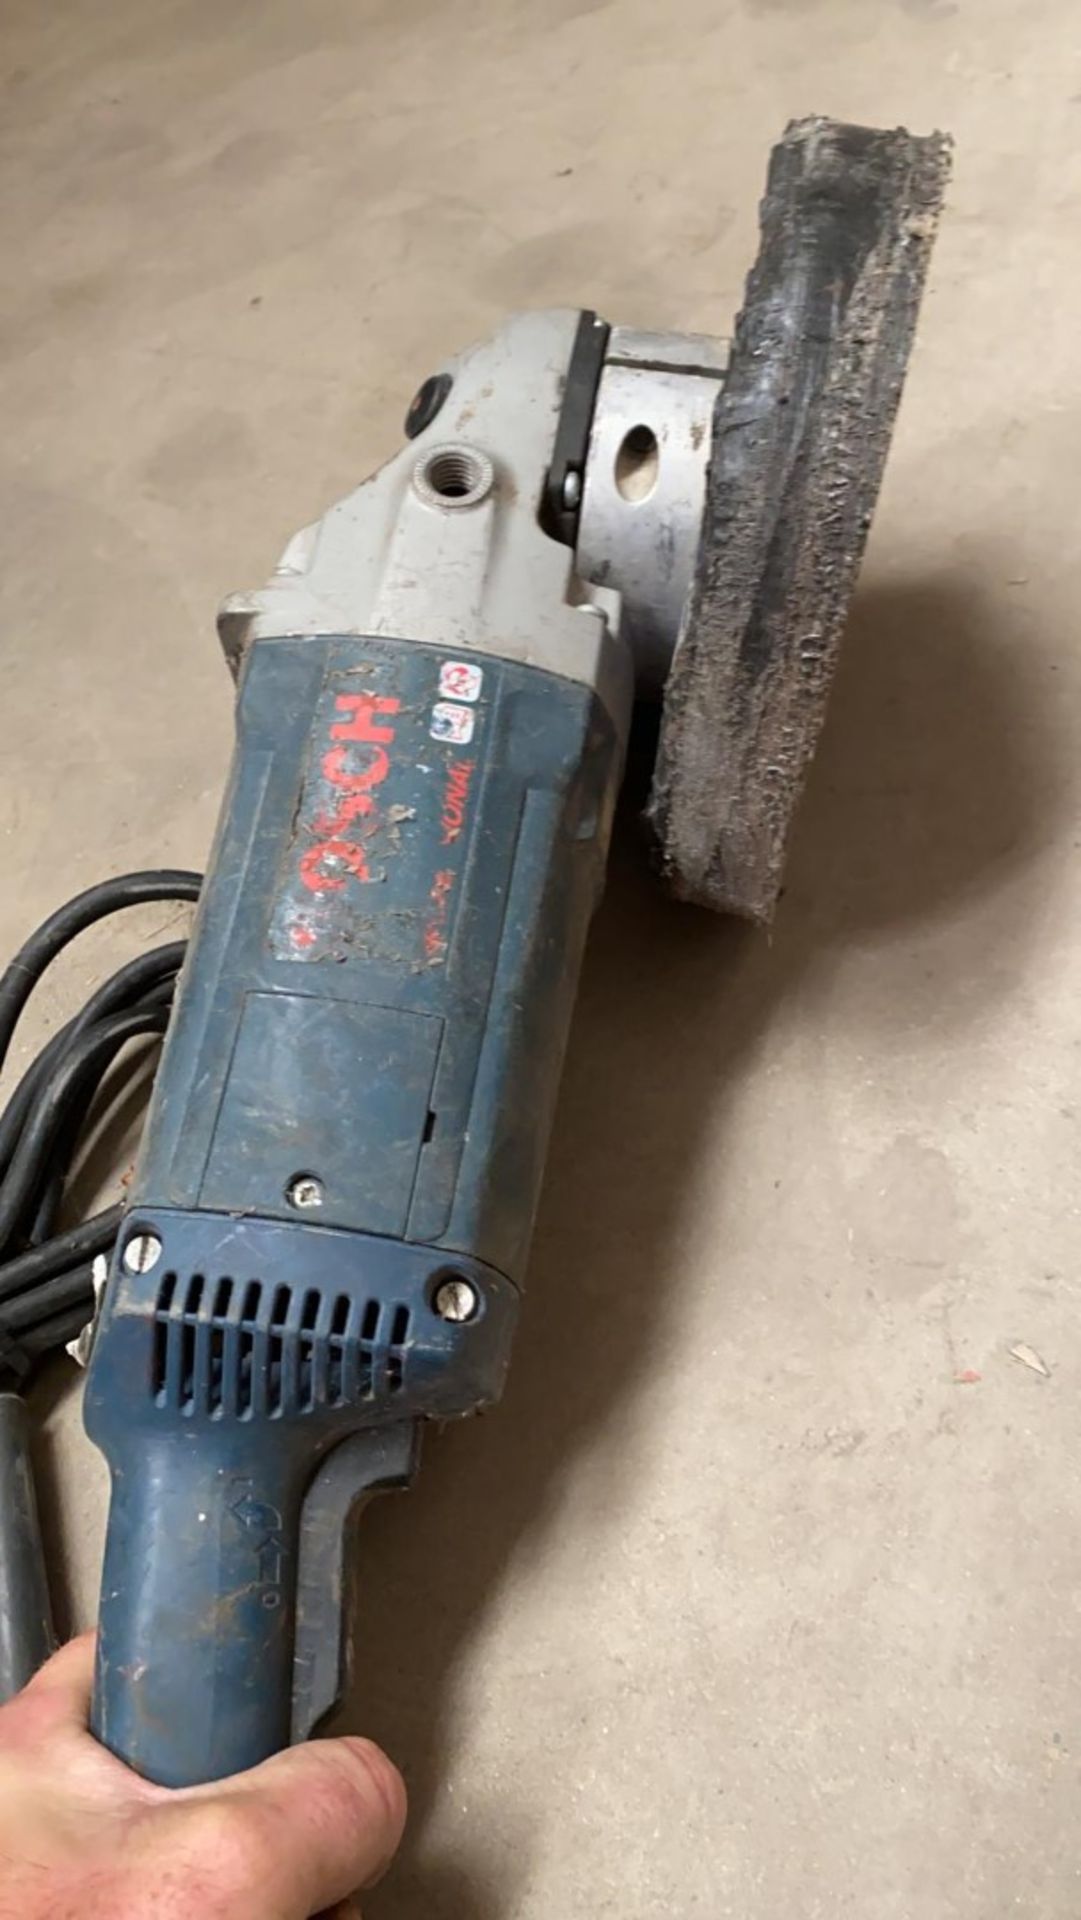 1 x Bosch 110V Grinder - Used, Recently Removed From A Working Site - CL505 - Ref: TL011 - Location: - Image 3 of 4